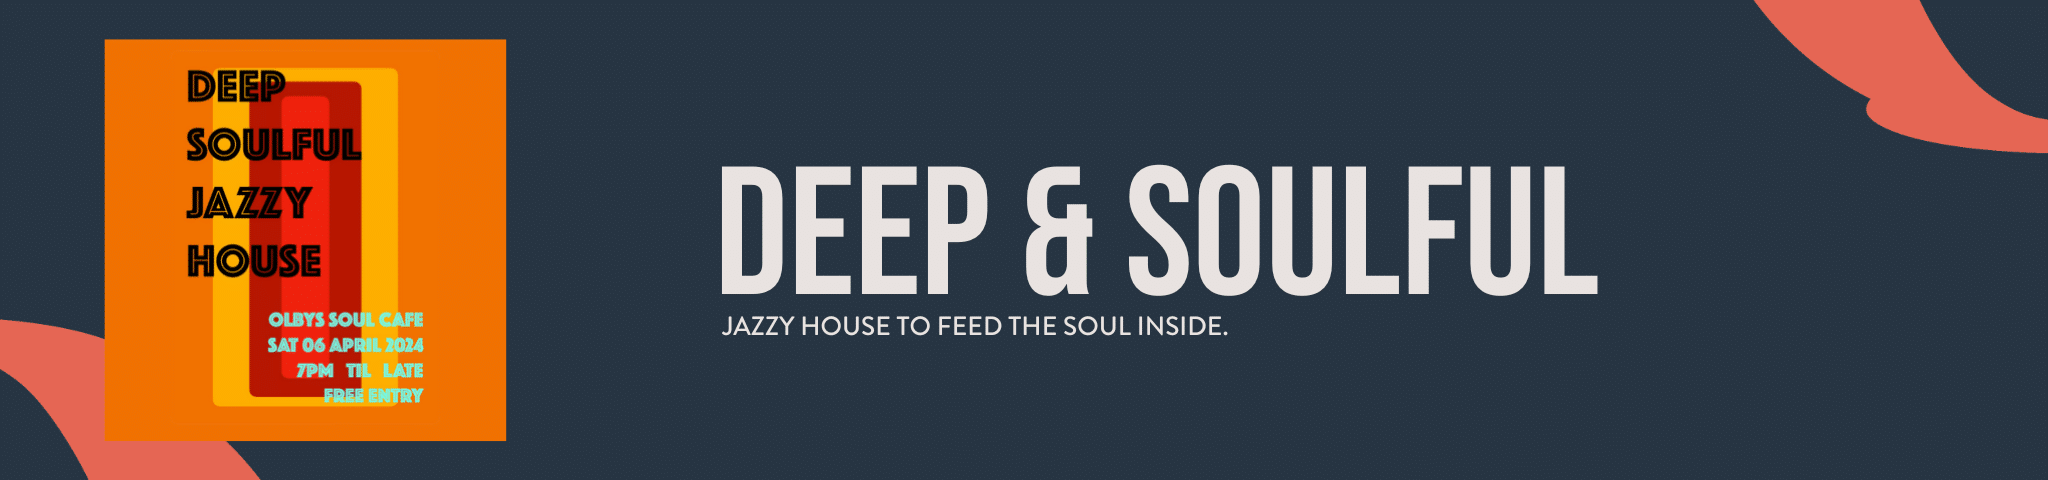 DEEP & SOULFUL JAZZY HOUSE:  – 6TH APRIL 2024